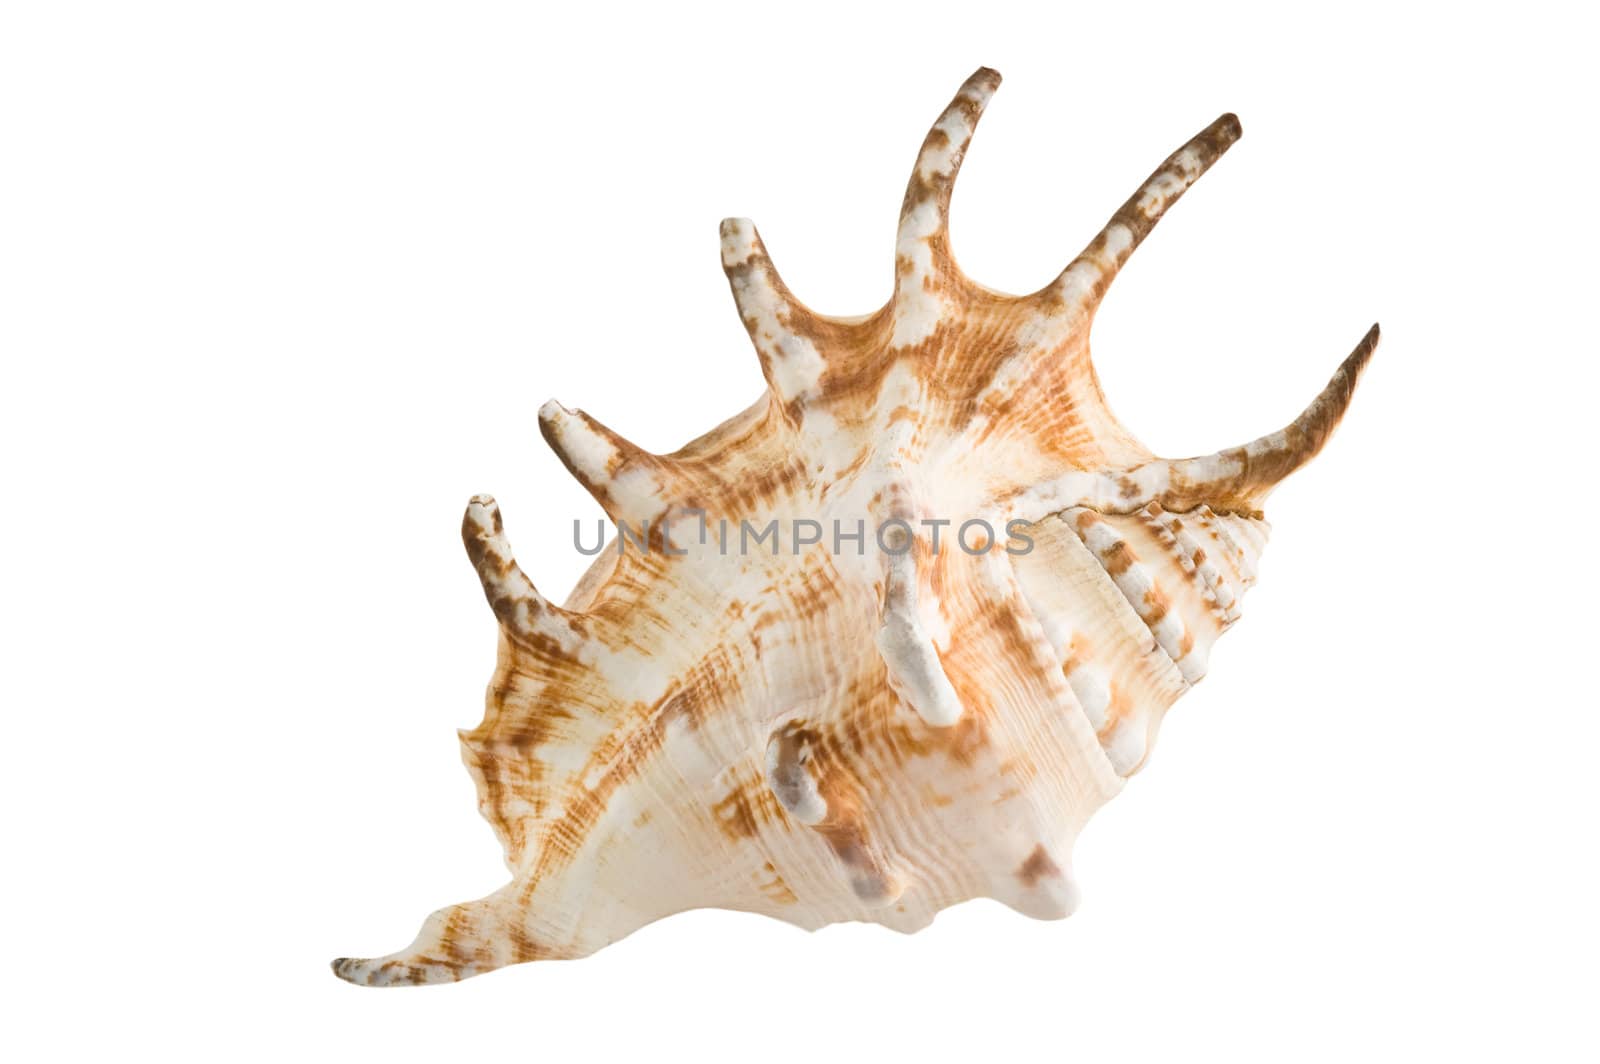 Marine shell isolated on white background, clipping path.
